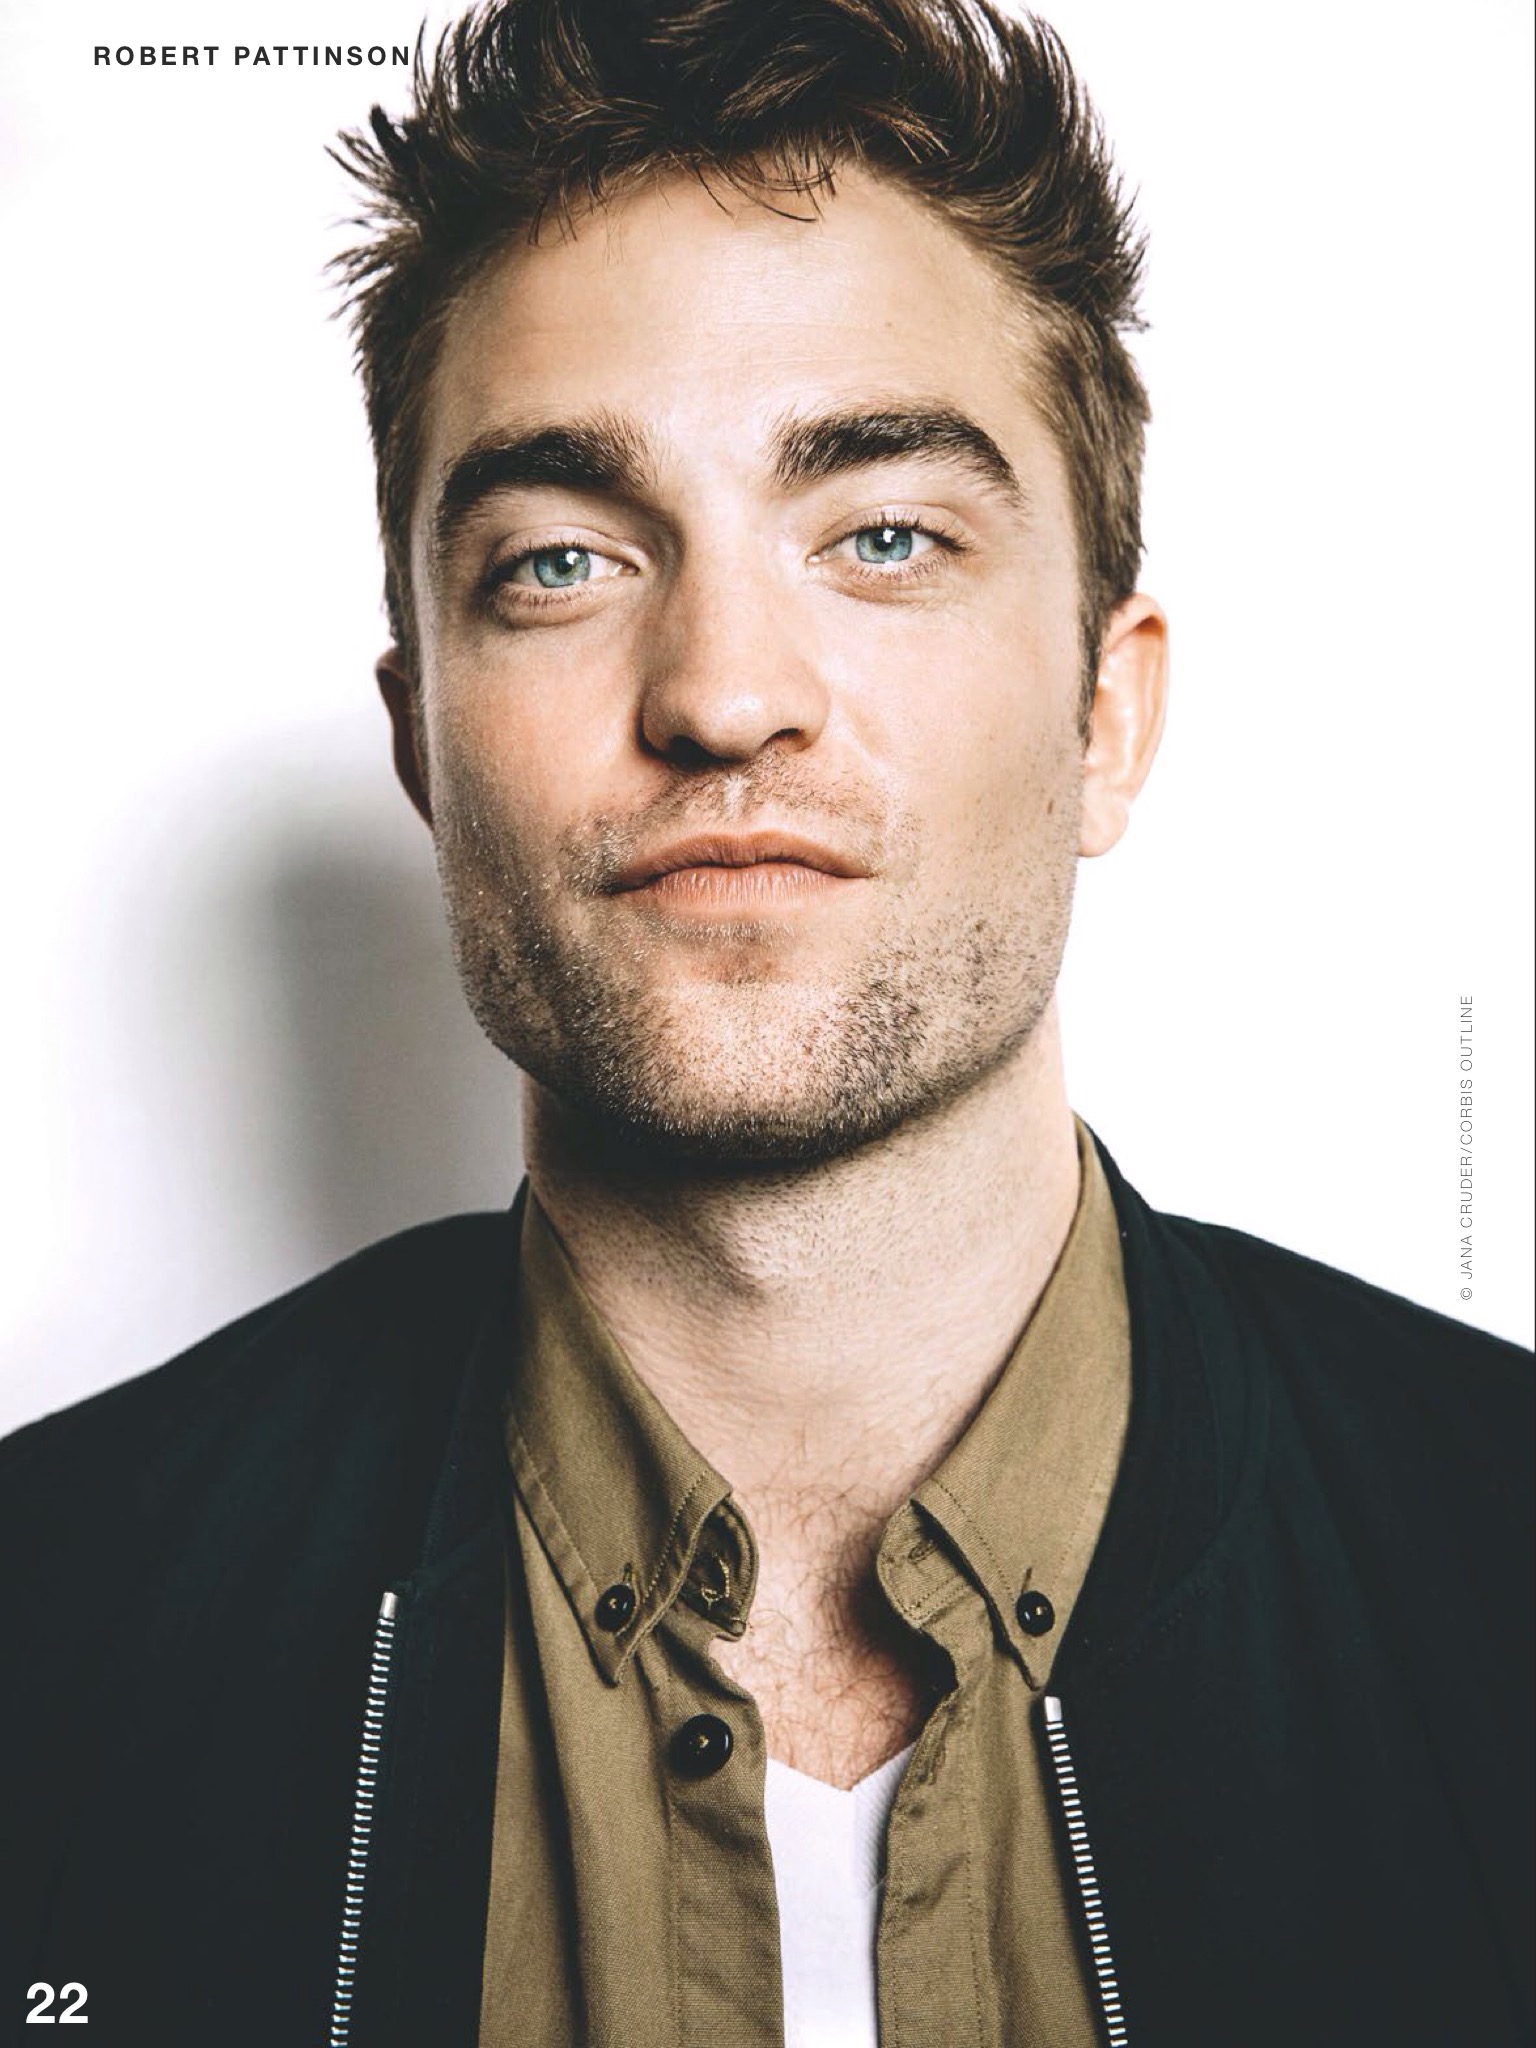 Robert Pattinson on the cover of NME Magazine | Thinking of Rob1536 x 2048